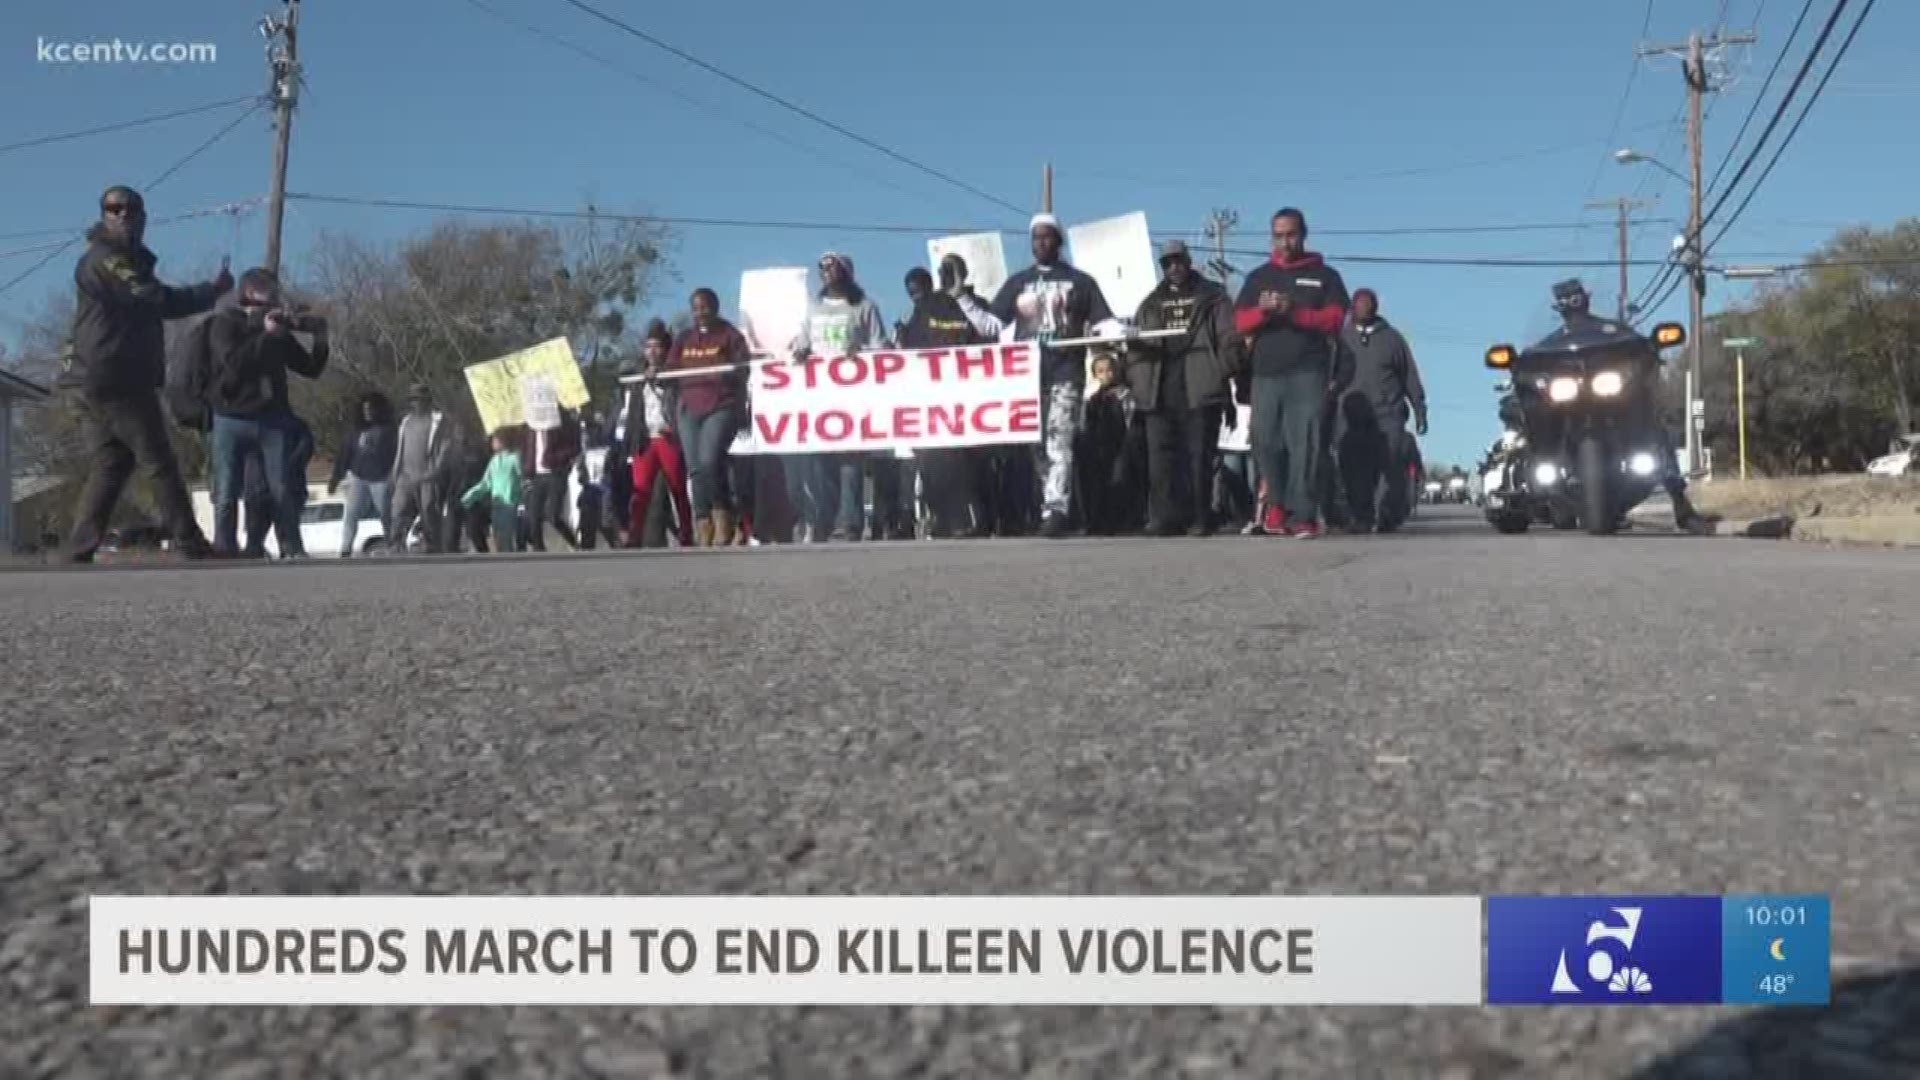 Hundreds took to Killeen's streets to call for an end to violence around the city after a recent string of shootings.